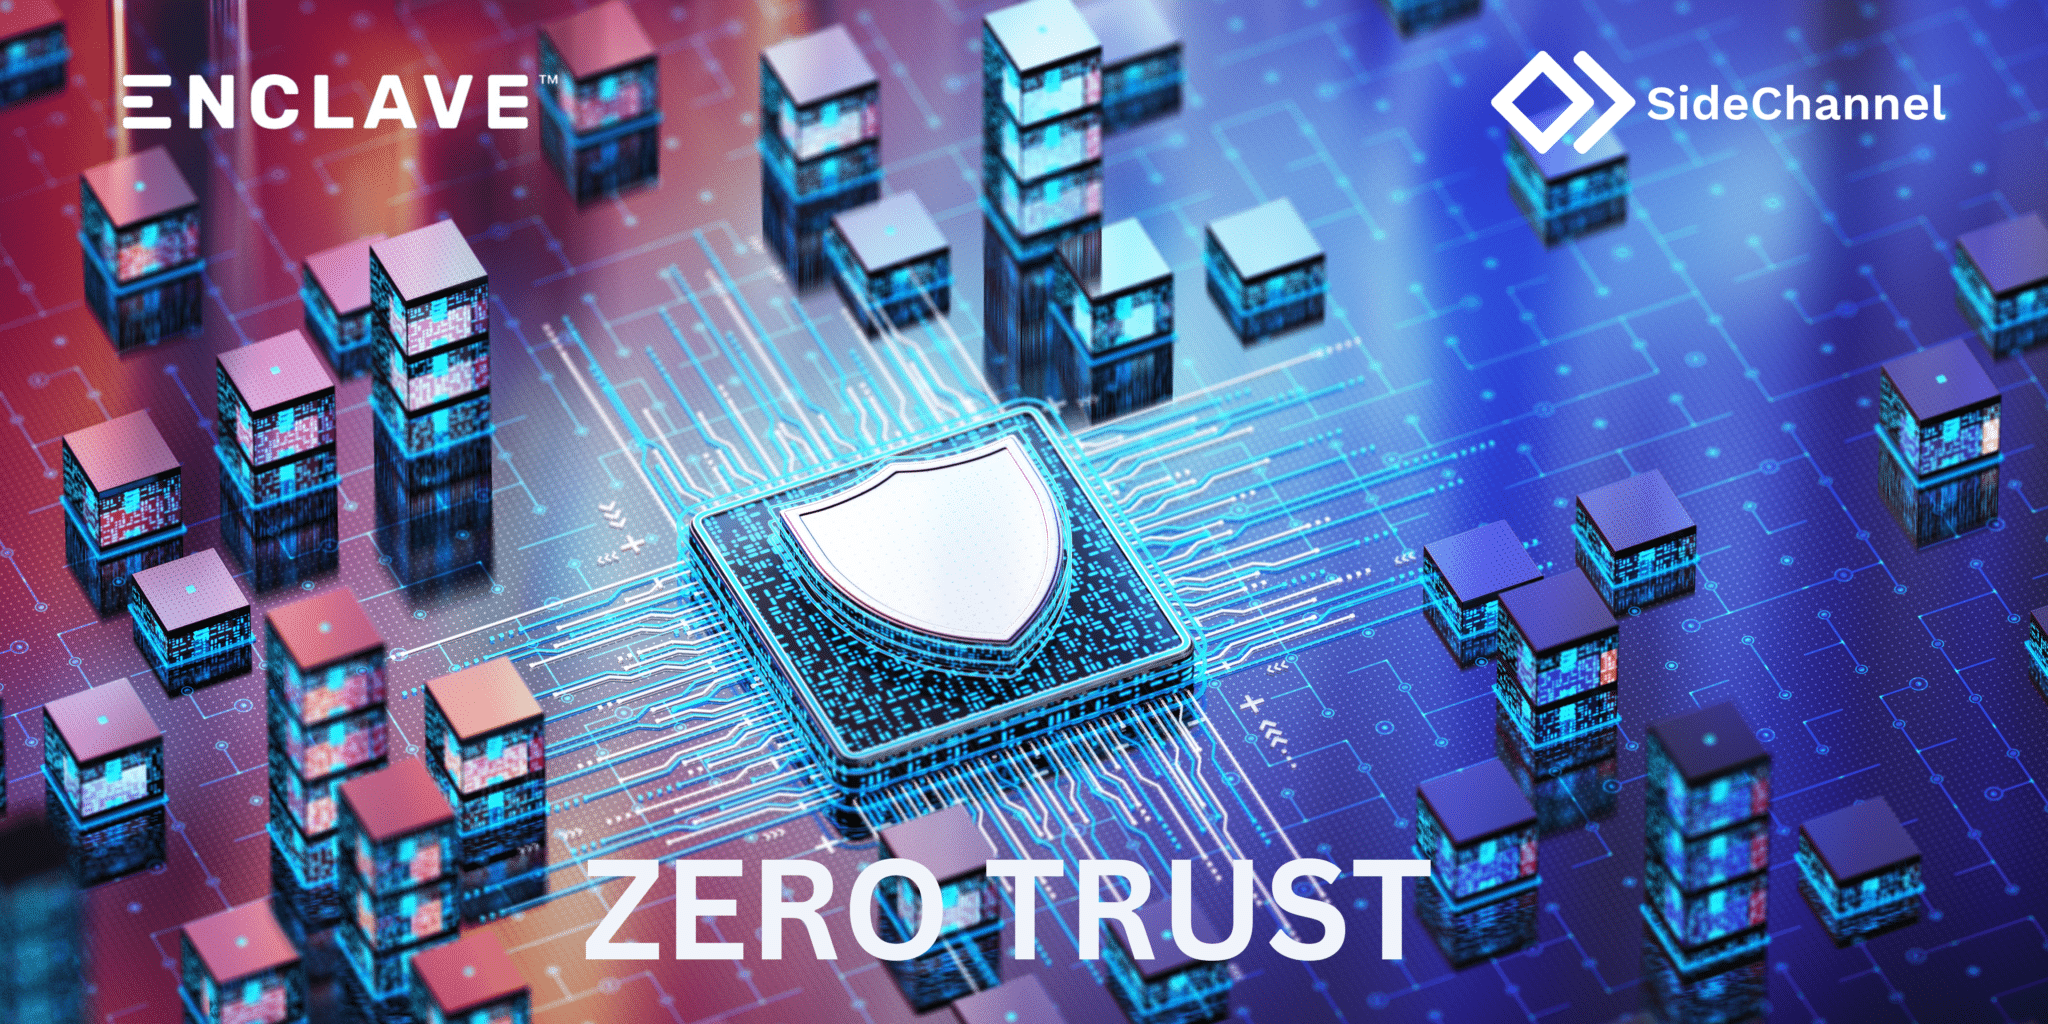 Shield on computer circuit, with "Zero Trust" text